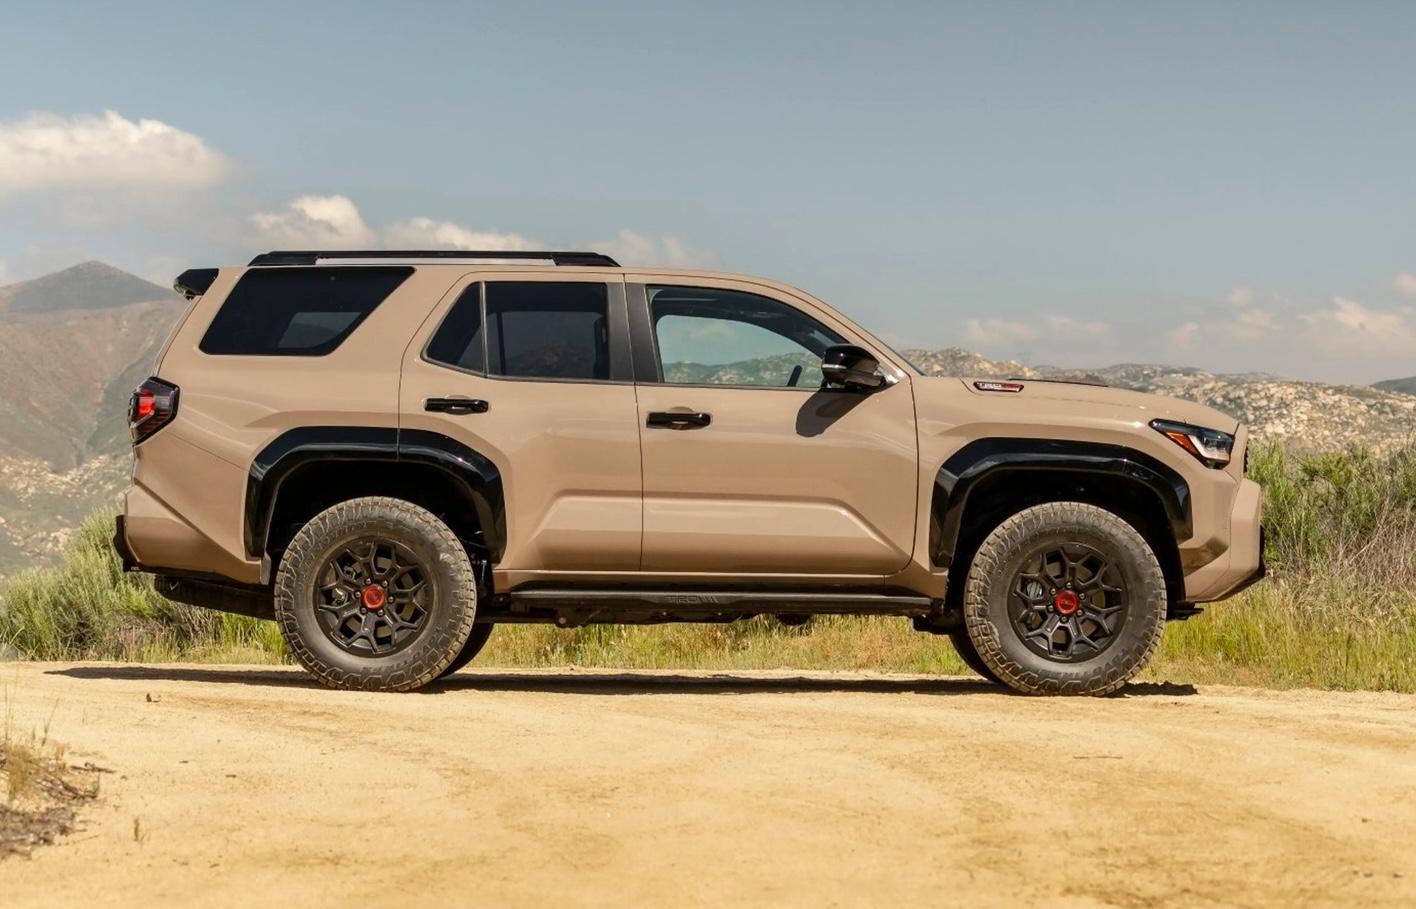 2025 Toyota 4runner 2025 4Runner Photos & Specs! 🔥 Trailhunter, TRD Pro, Off-Road, Limited Trims 2025-toyota-4runner-wallpapers-1-copy-